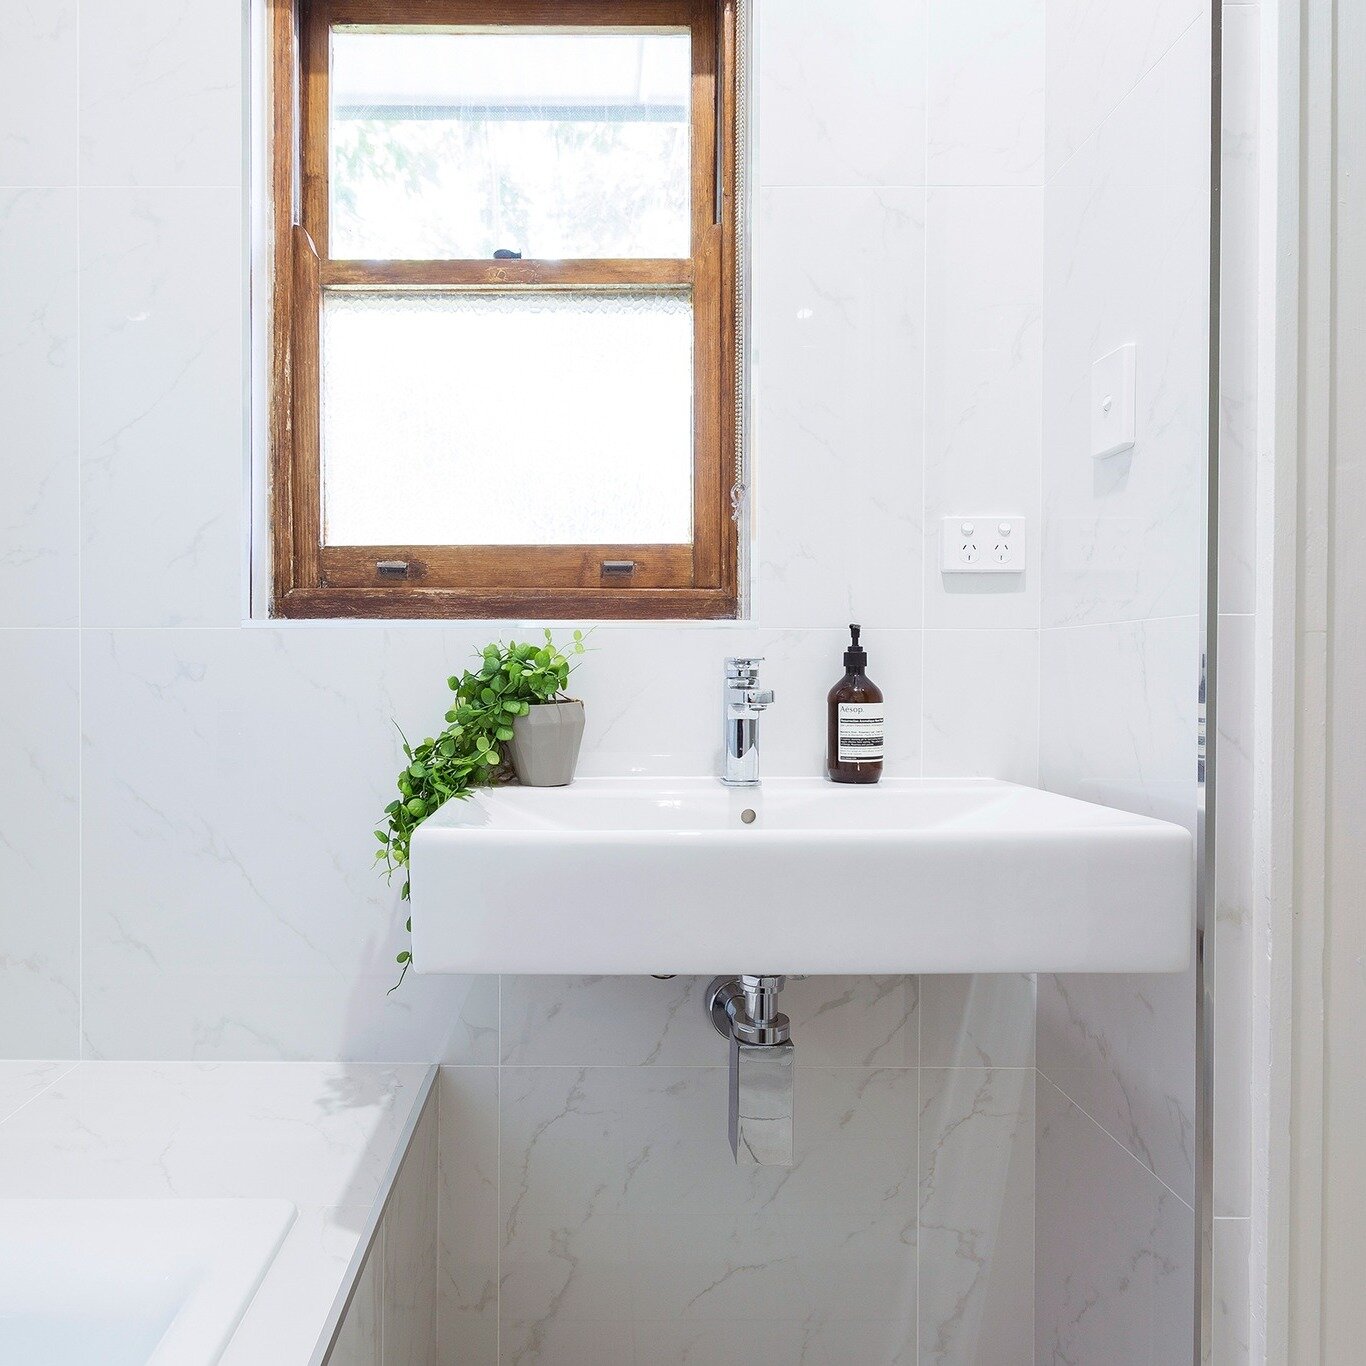 Check out these bathrooms we completed back in 2019 in Griffith and Narrabundah. 
They are as timeless and functional today as they were 5 years ago. 

Renovate once - renovate well. You don't need a lot of space to create a beautiful ensuite, so if 